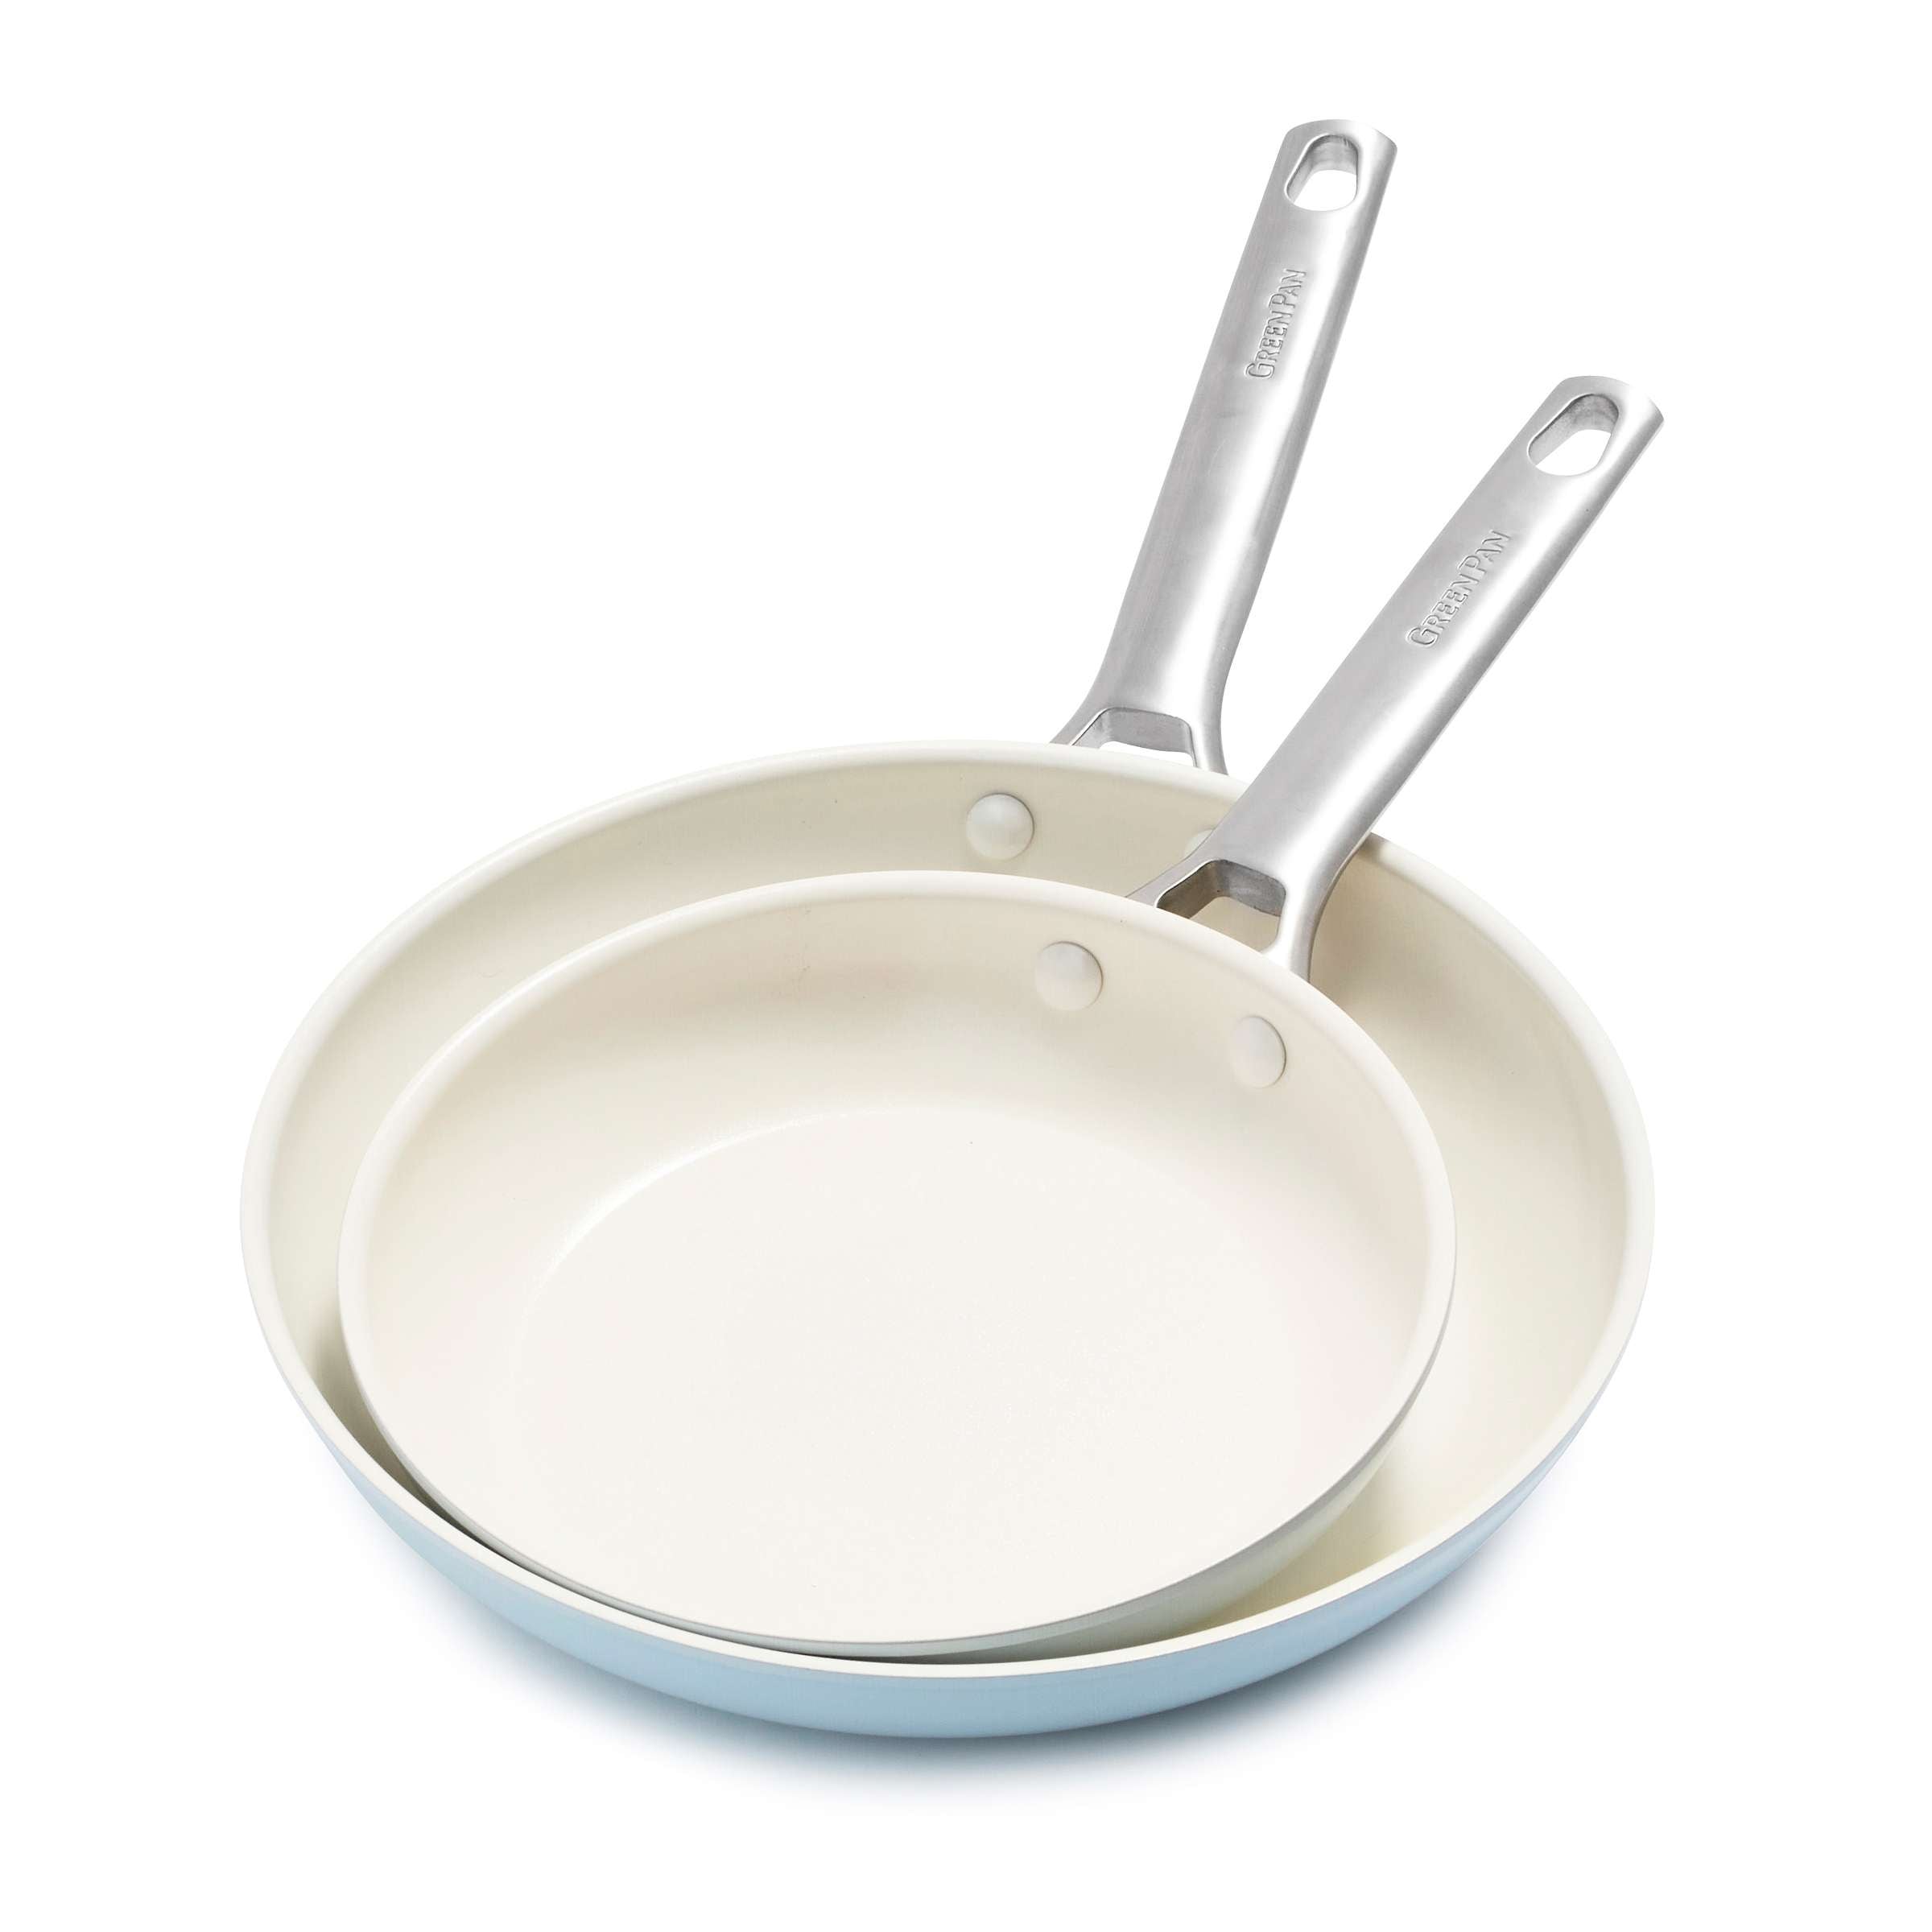 https://ak1.ostkcdn.com/images/products/is/images/direct/a5a3161fca51fd840e79ef19c96f0f93e7b8cb2b/GreenPan-Padova-Ceramic-Non-Stick-Open-Frypan-Set.jpg